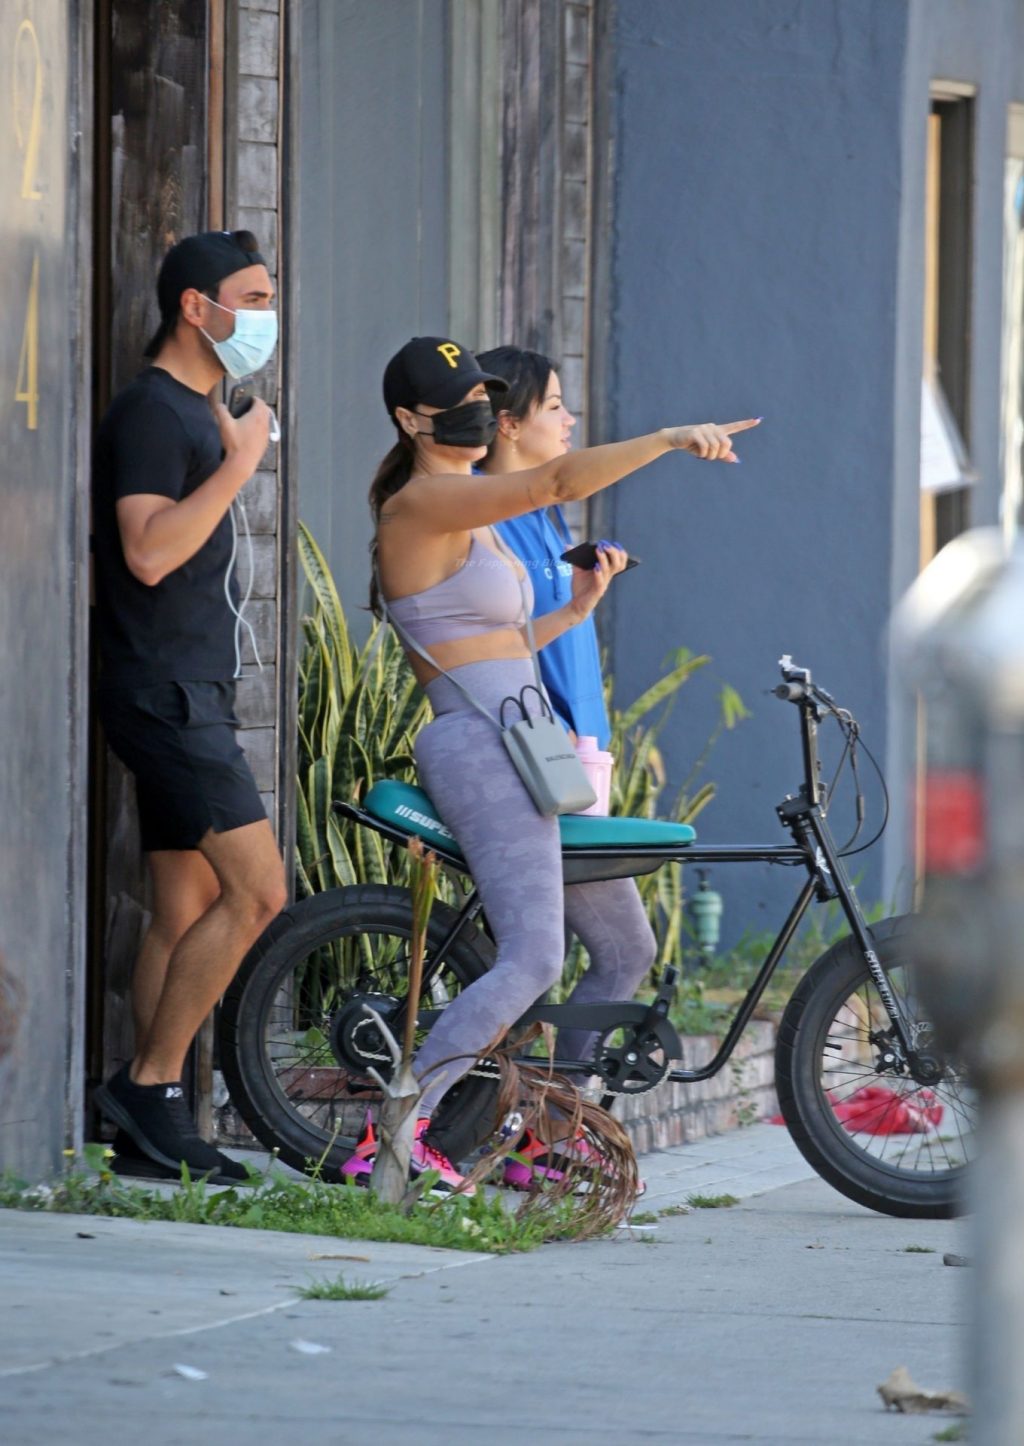 Yolanthe Cabau and a Friend Take a Spin on Her Super 73 Electric Bike in LA (26 Photos)